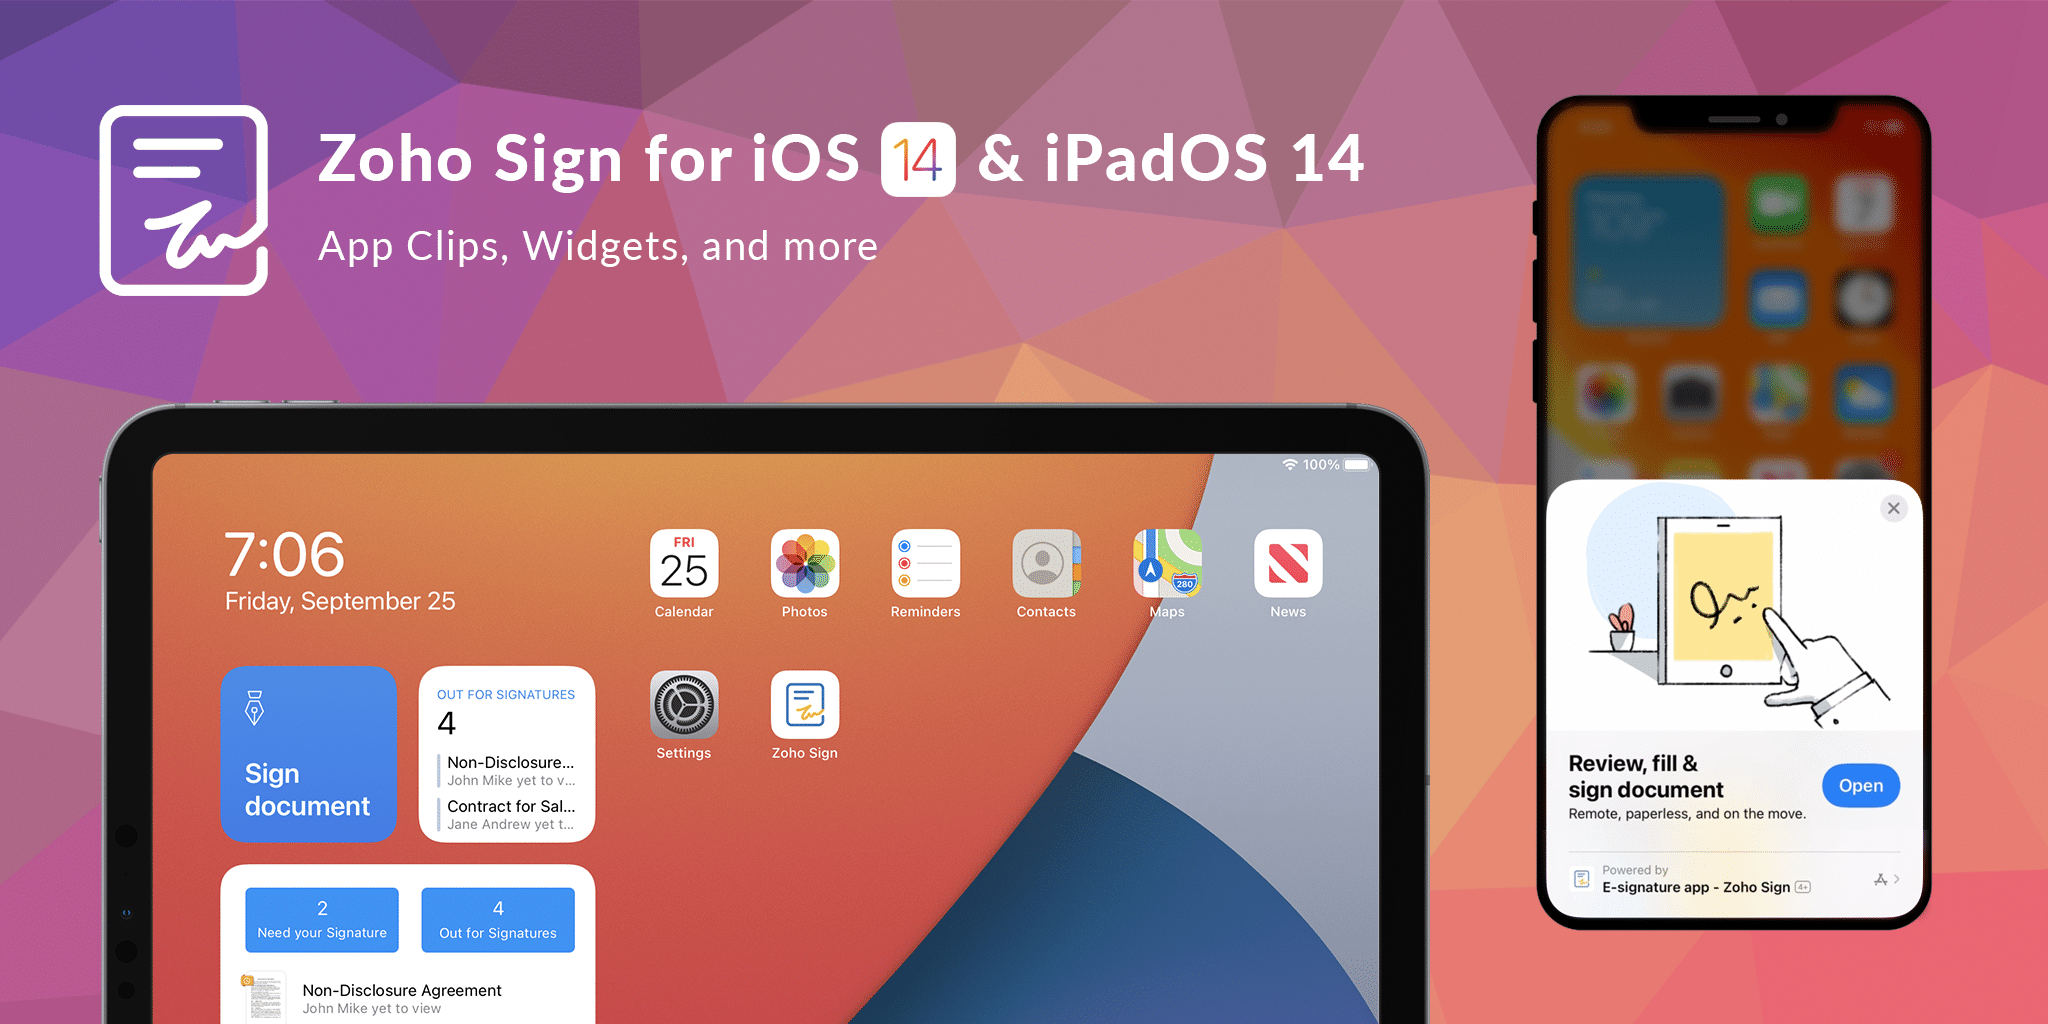 Zoho Sign for iOS 14 and iPadOS 14